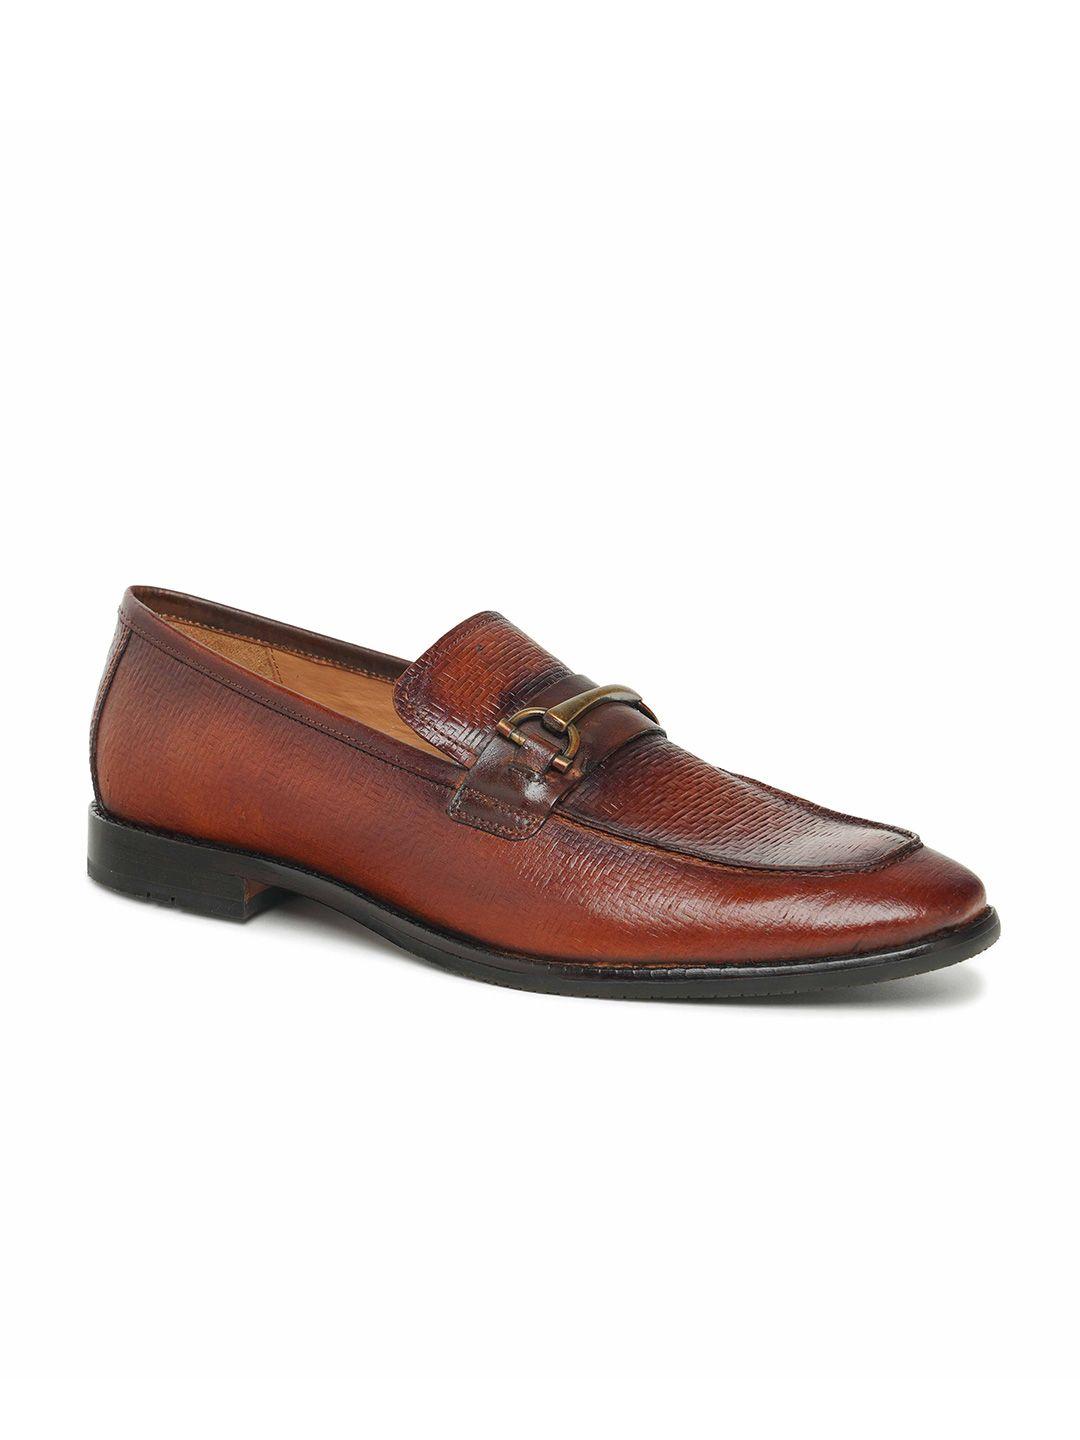 Ruosh Men Textured Leather Formal Loafers